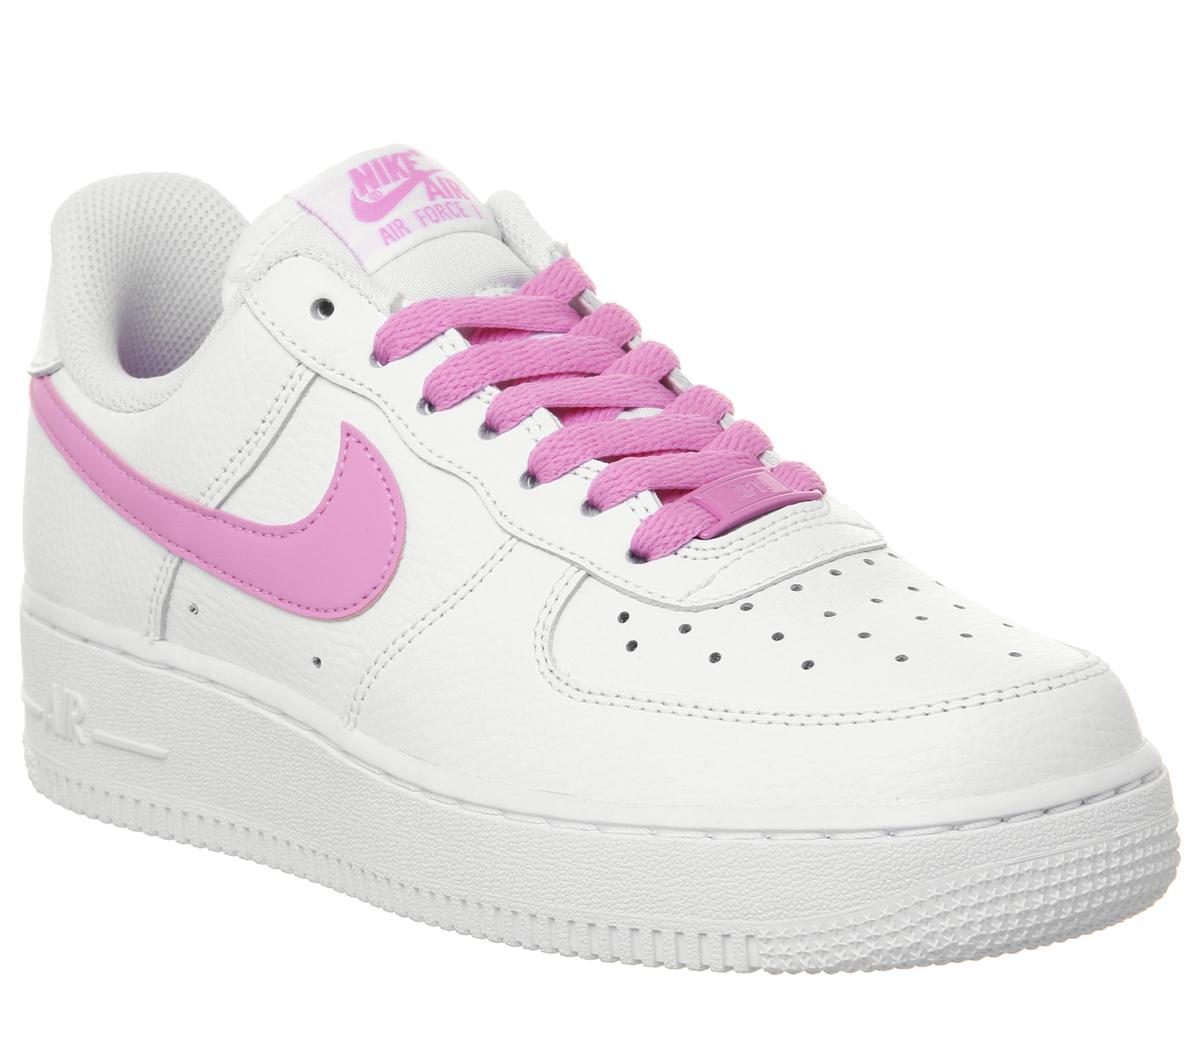 NikeAir Force 1 '07 TrainersWhite Psychic Pink